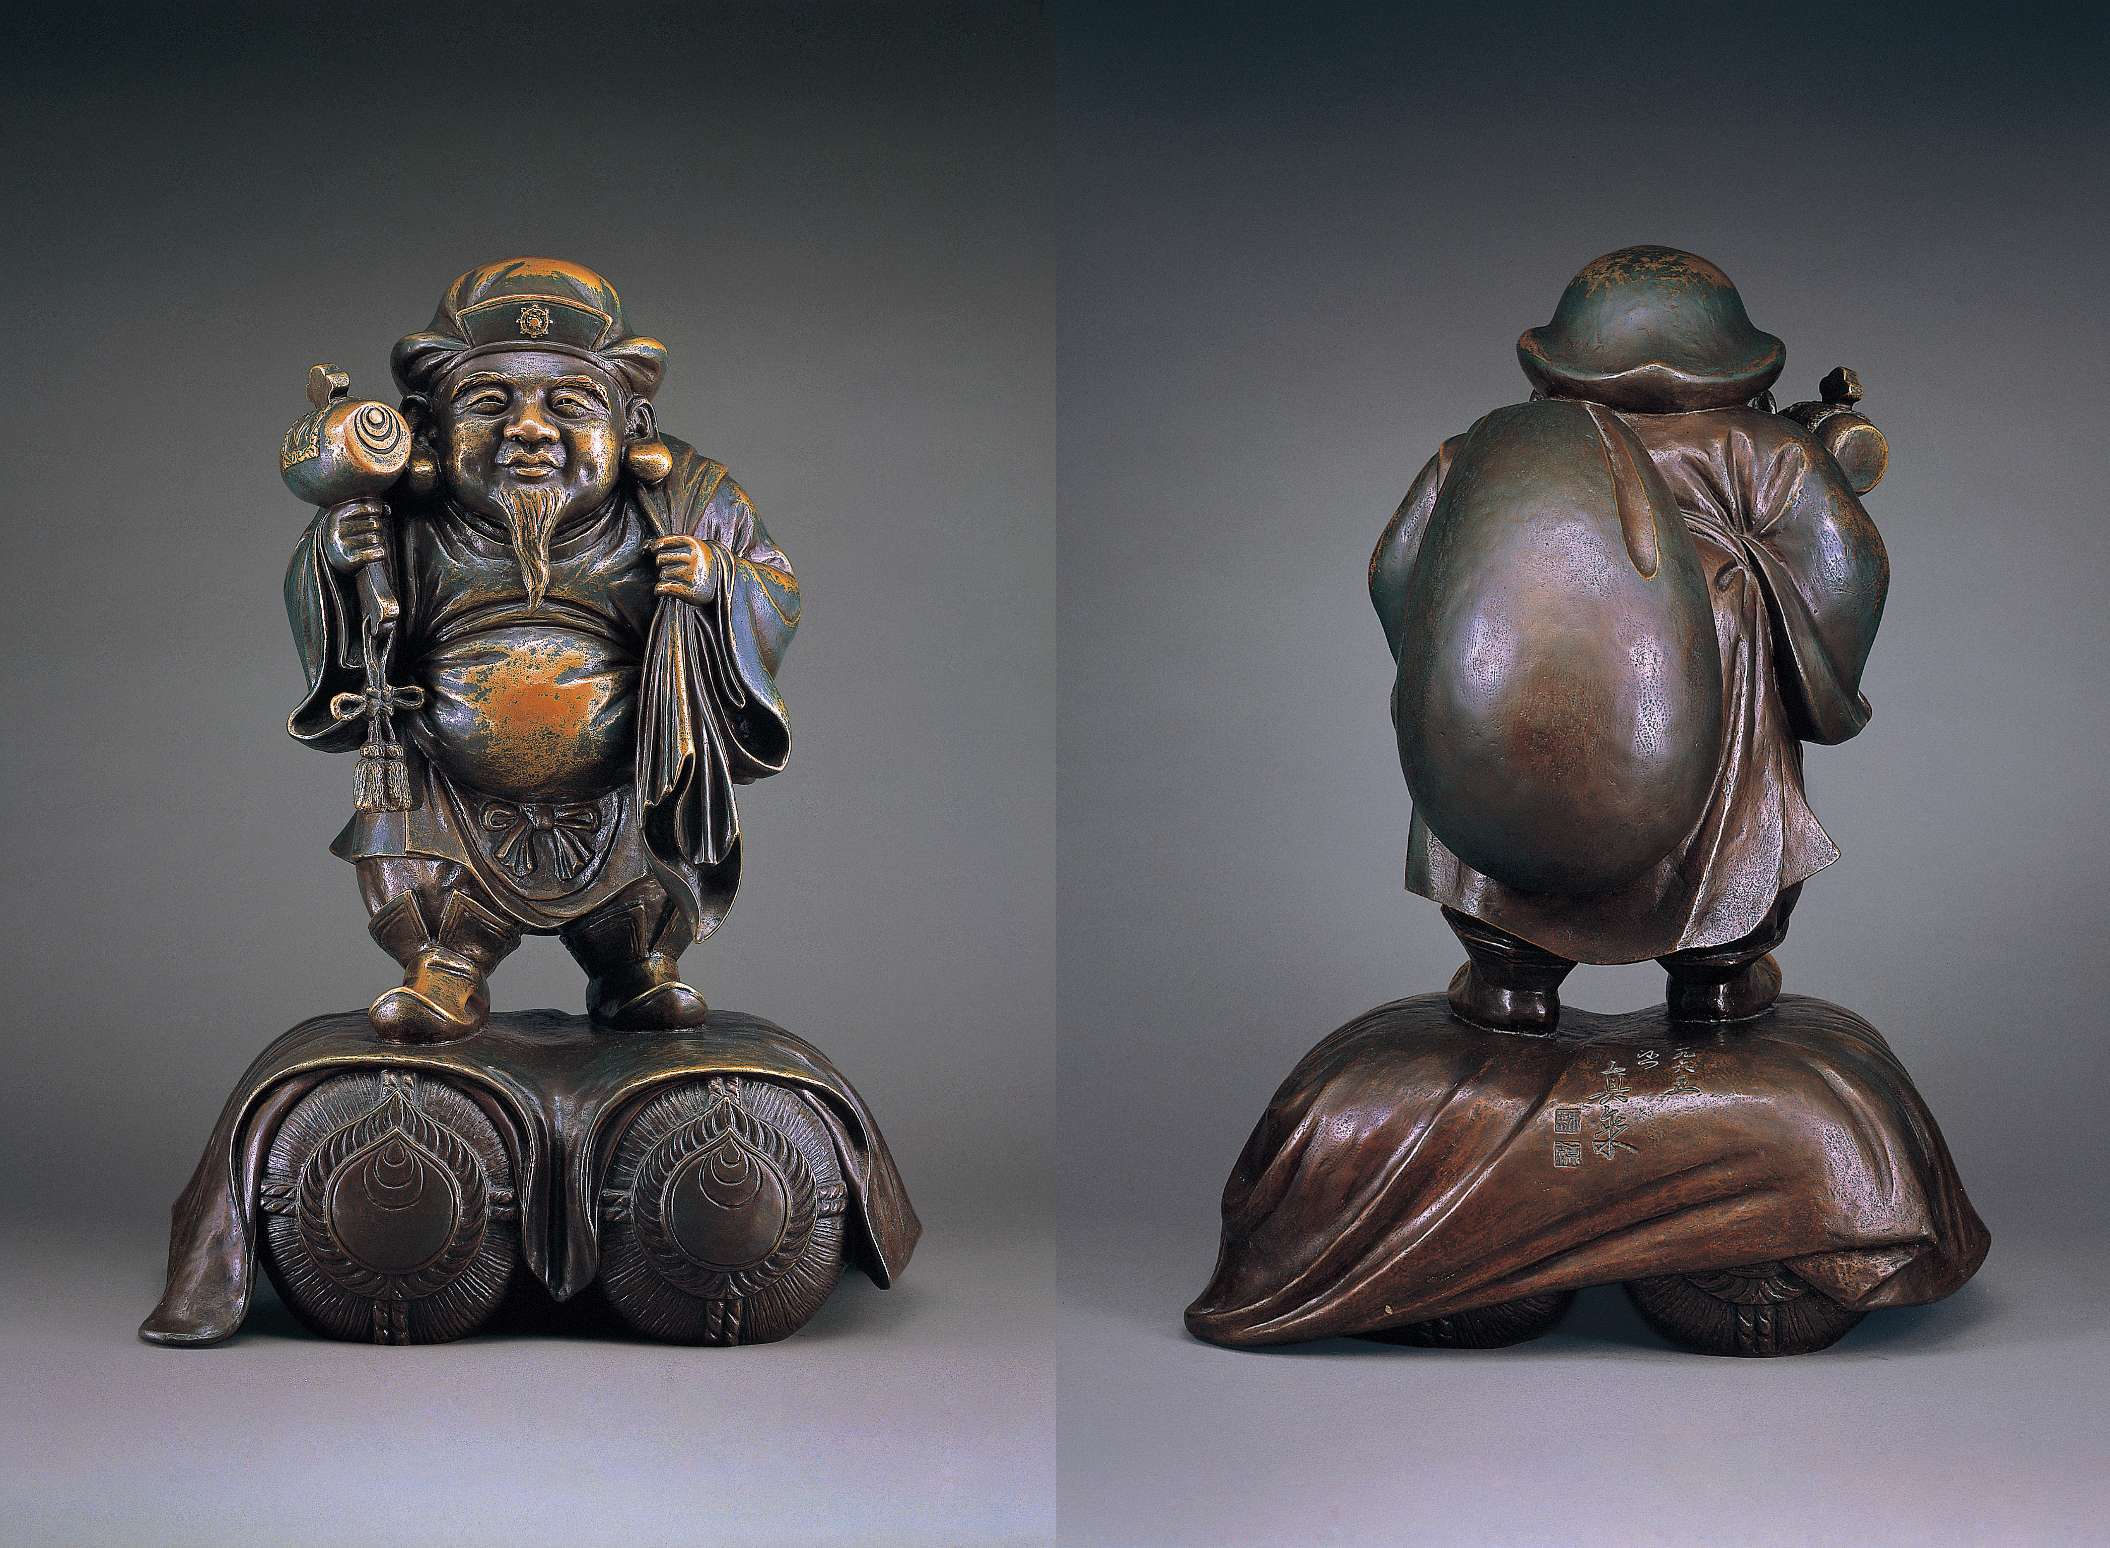 (left) A dark hued statue of a stout, bearded man wearing Chinese tunic, hat, and boots, right hand holding a mallet, left a sack at the shoulder, standing atop two bundles marked with the symbol of jewels. (right) The back of the statue shows the sack, full and bulging with contents, and Japanese calligraphy and and stamps etched into a smooth portion of the statue’s base.